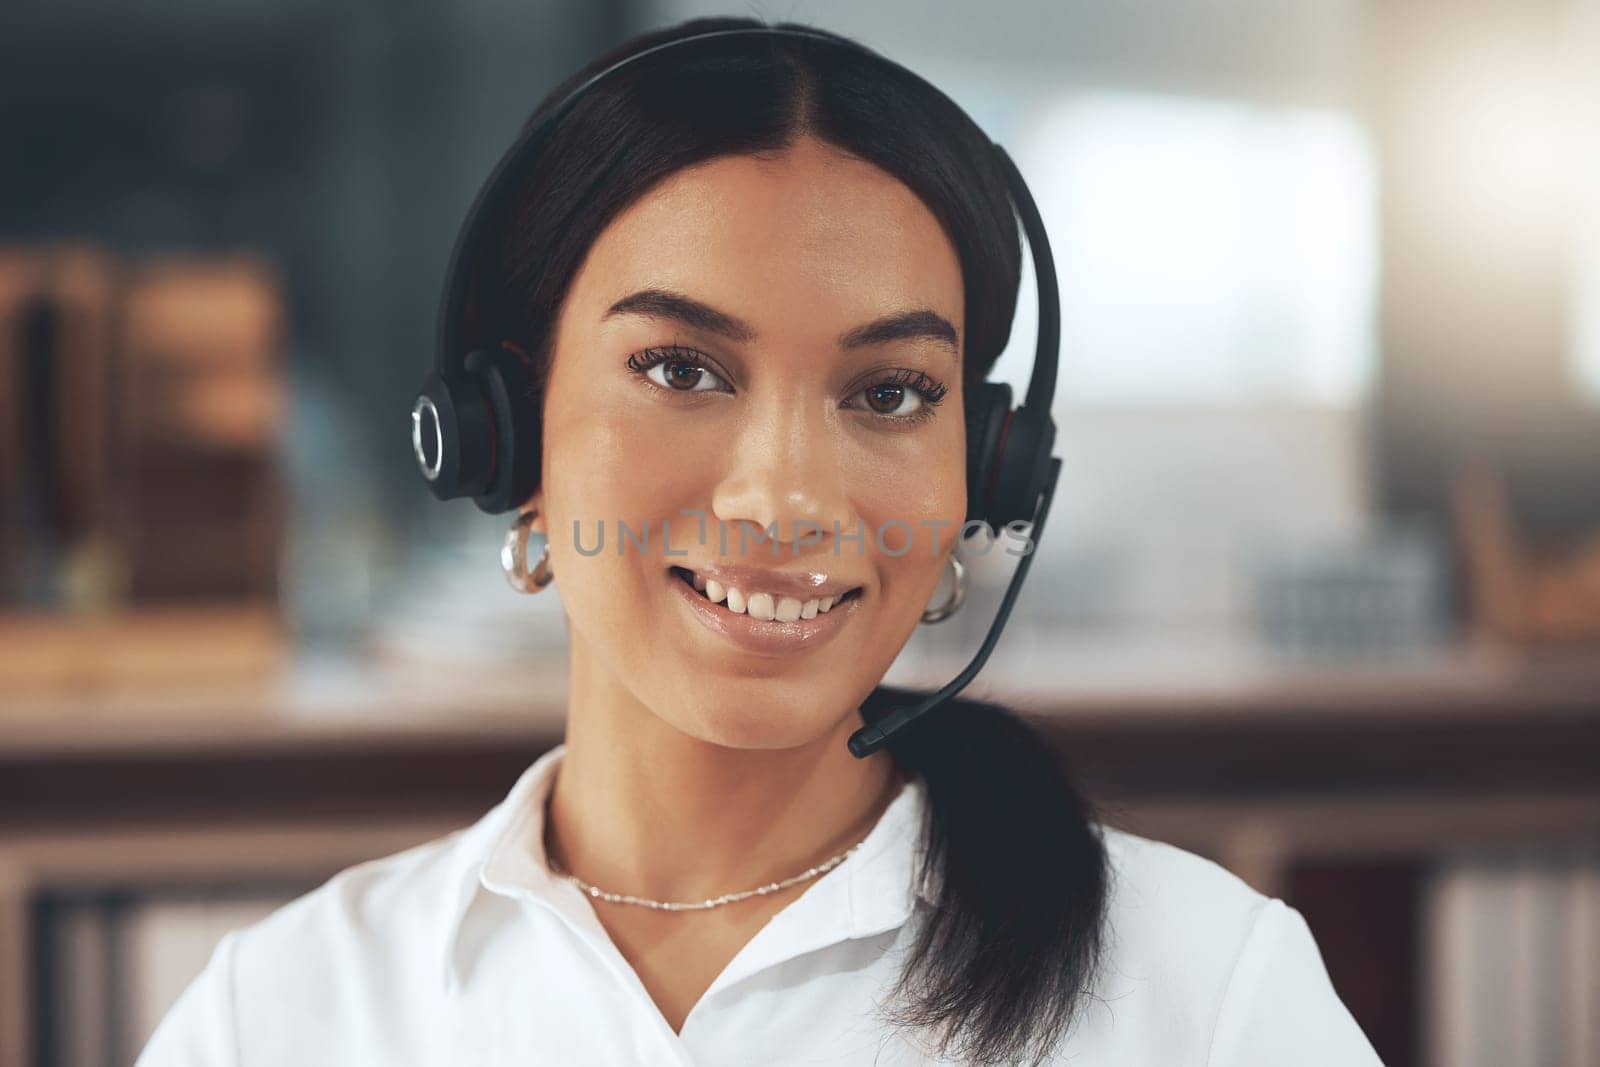 Call center, portrait and smile with woman consultant in telemarketing office for help or sales. Contact us, face and headset with happy agent in workplace for consulting, customer service or support.